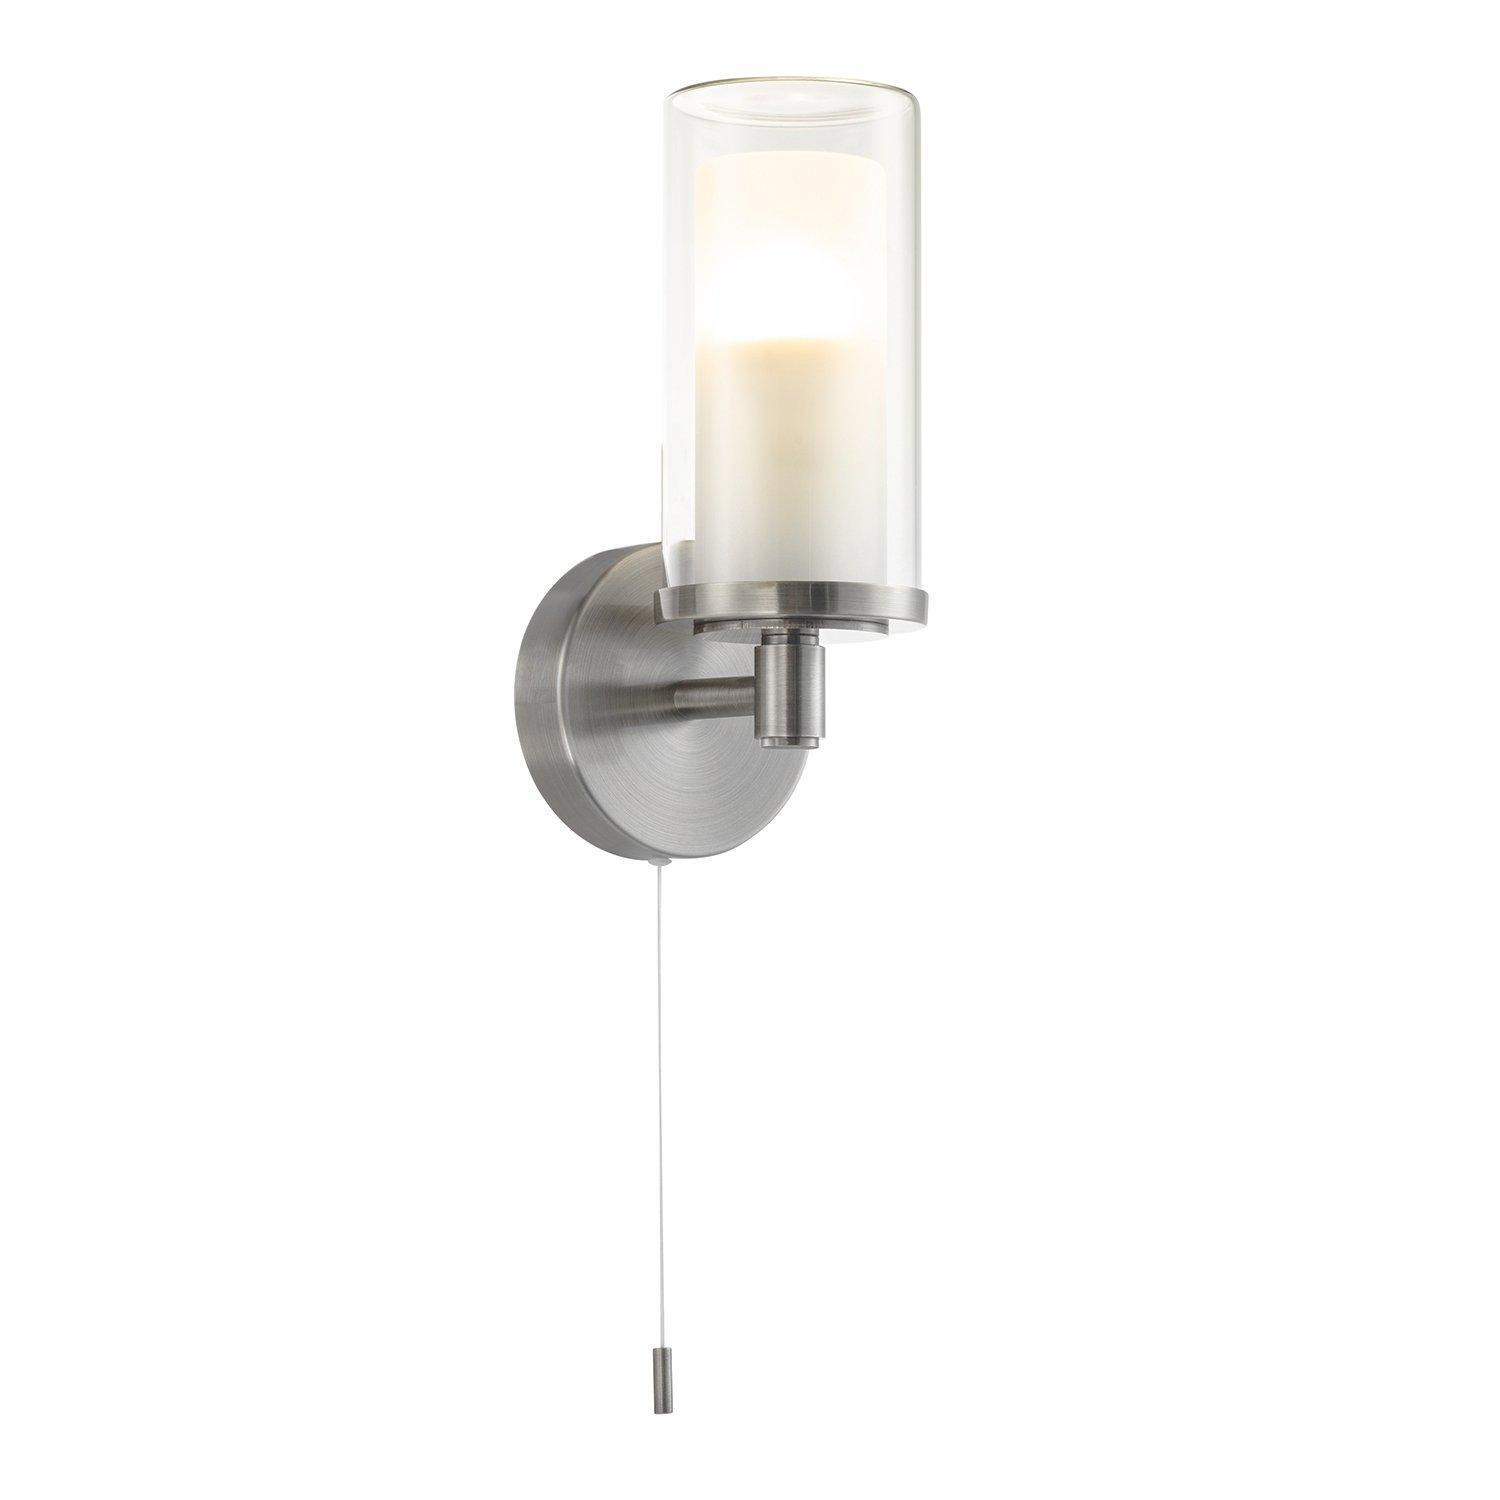 Contemporary Double Glass and Metal Bathroom Wall Lamp IP44 Rated - image 1